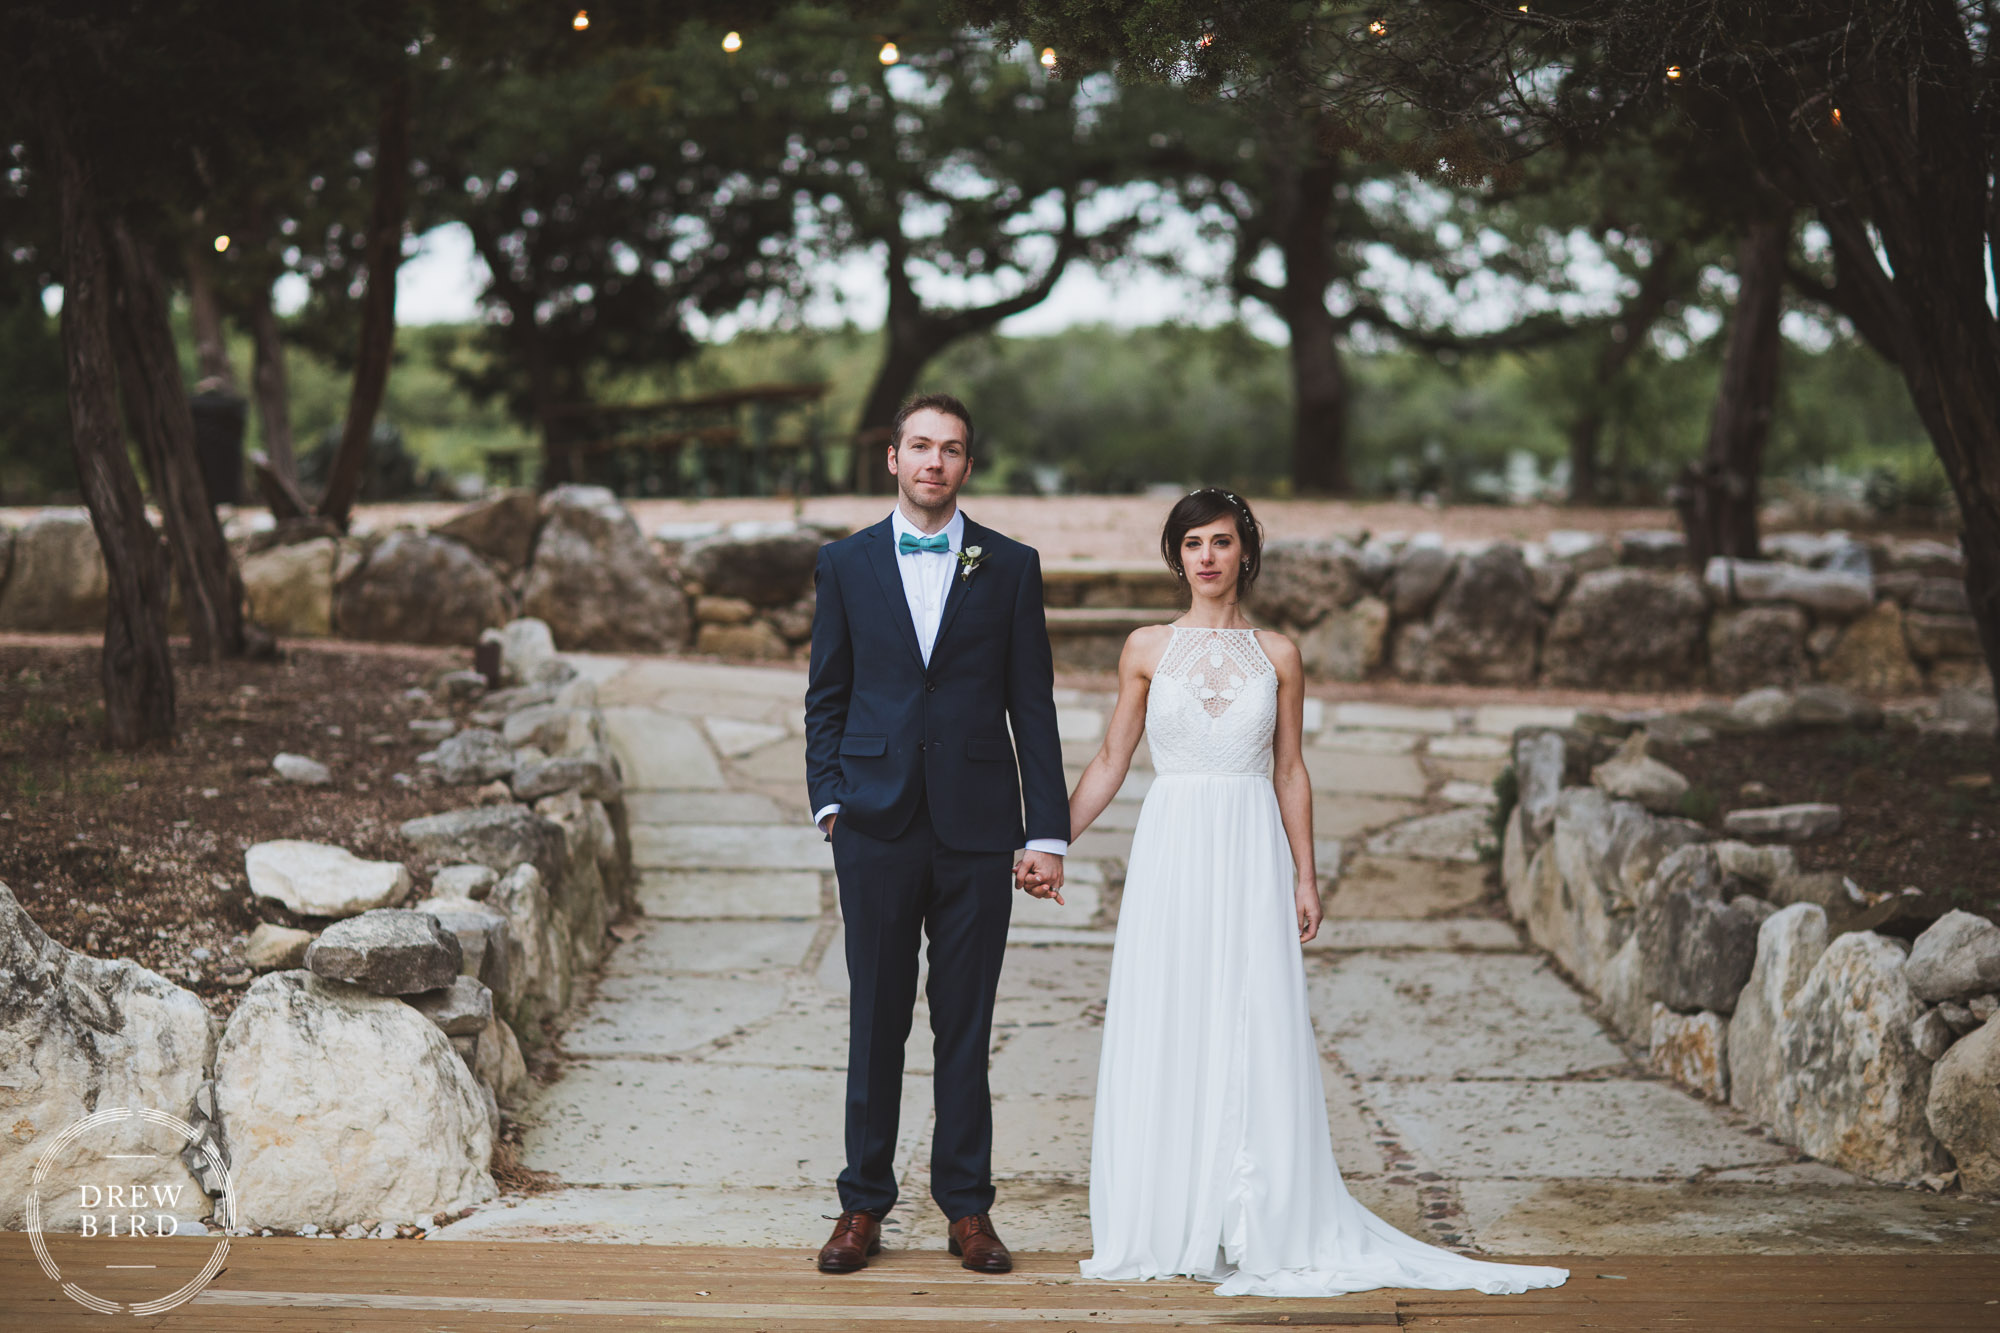 Bride and groom wedding portrait in front of a rock wall and path. Austin Texas ranch wedding.